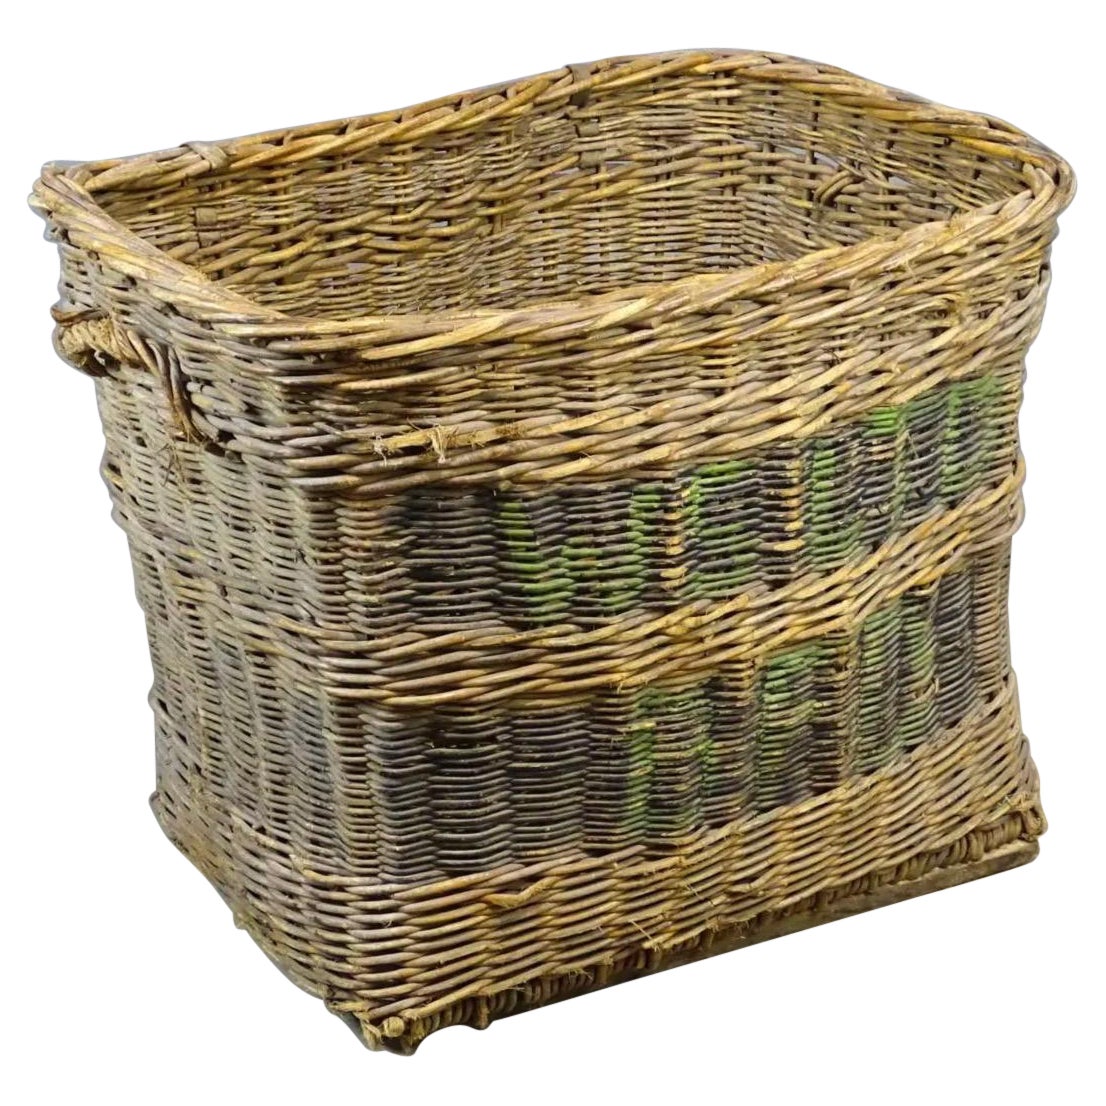 Large French Woven Wicker Laundry Basket